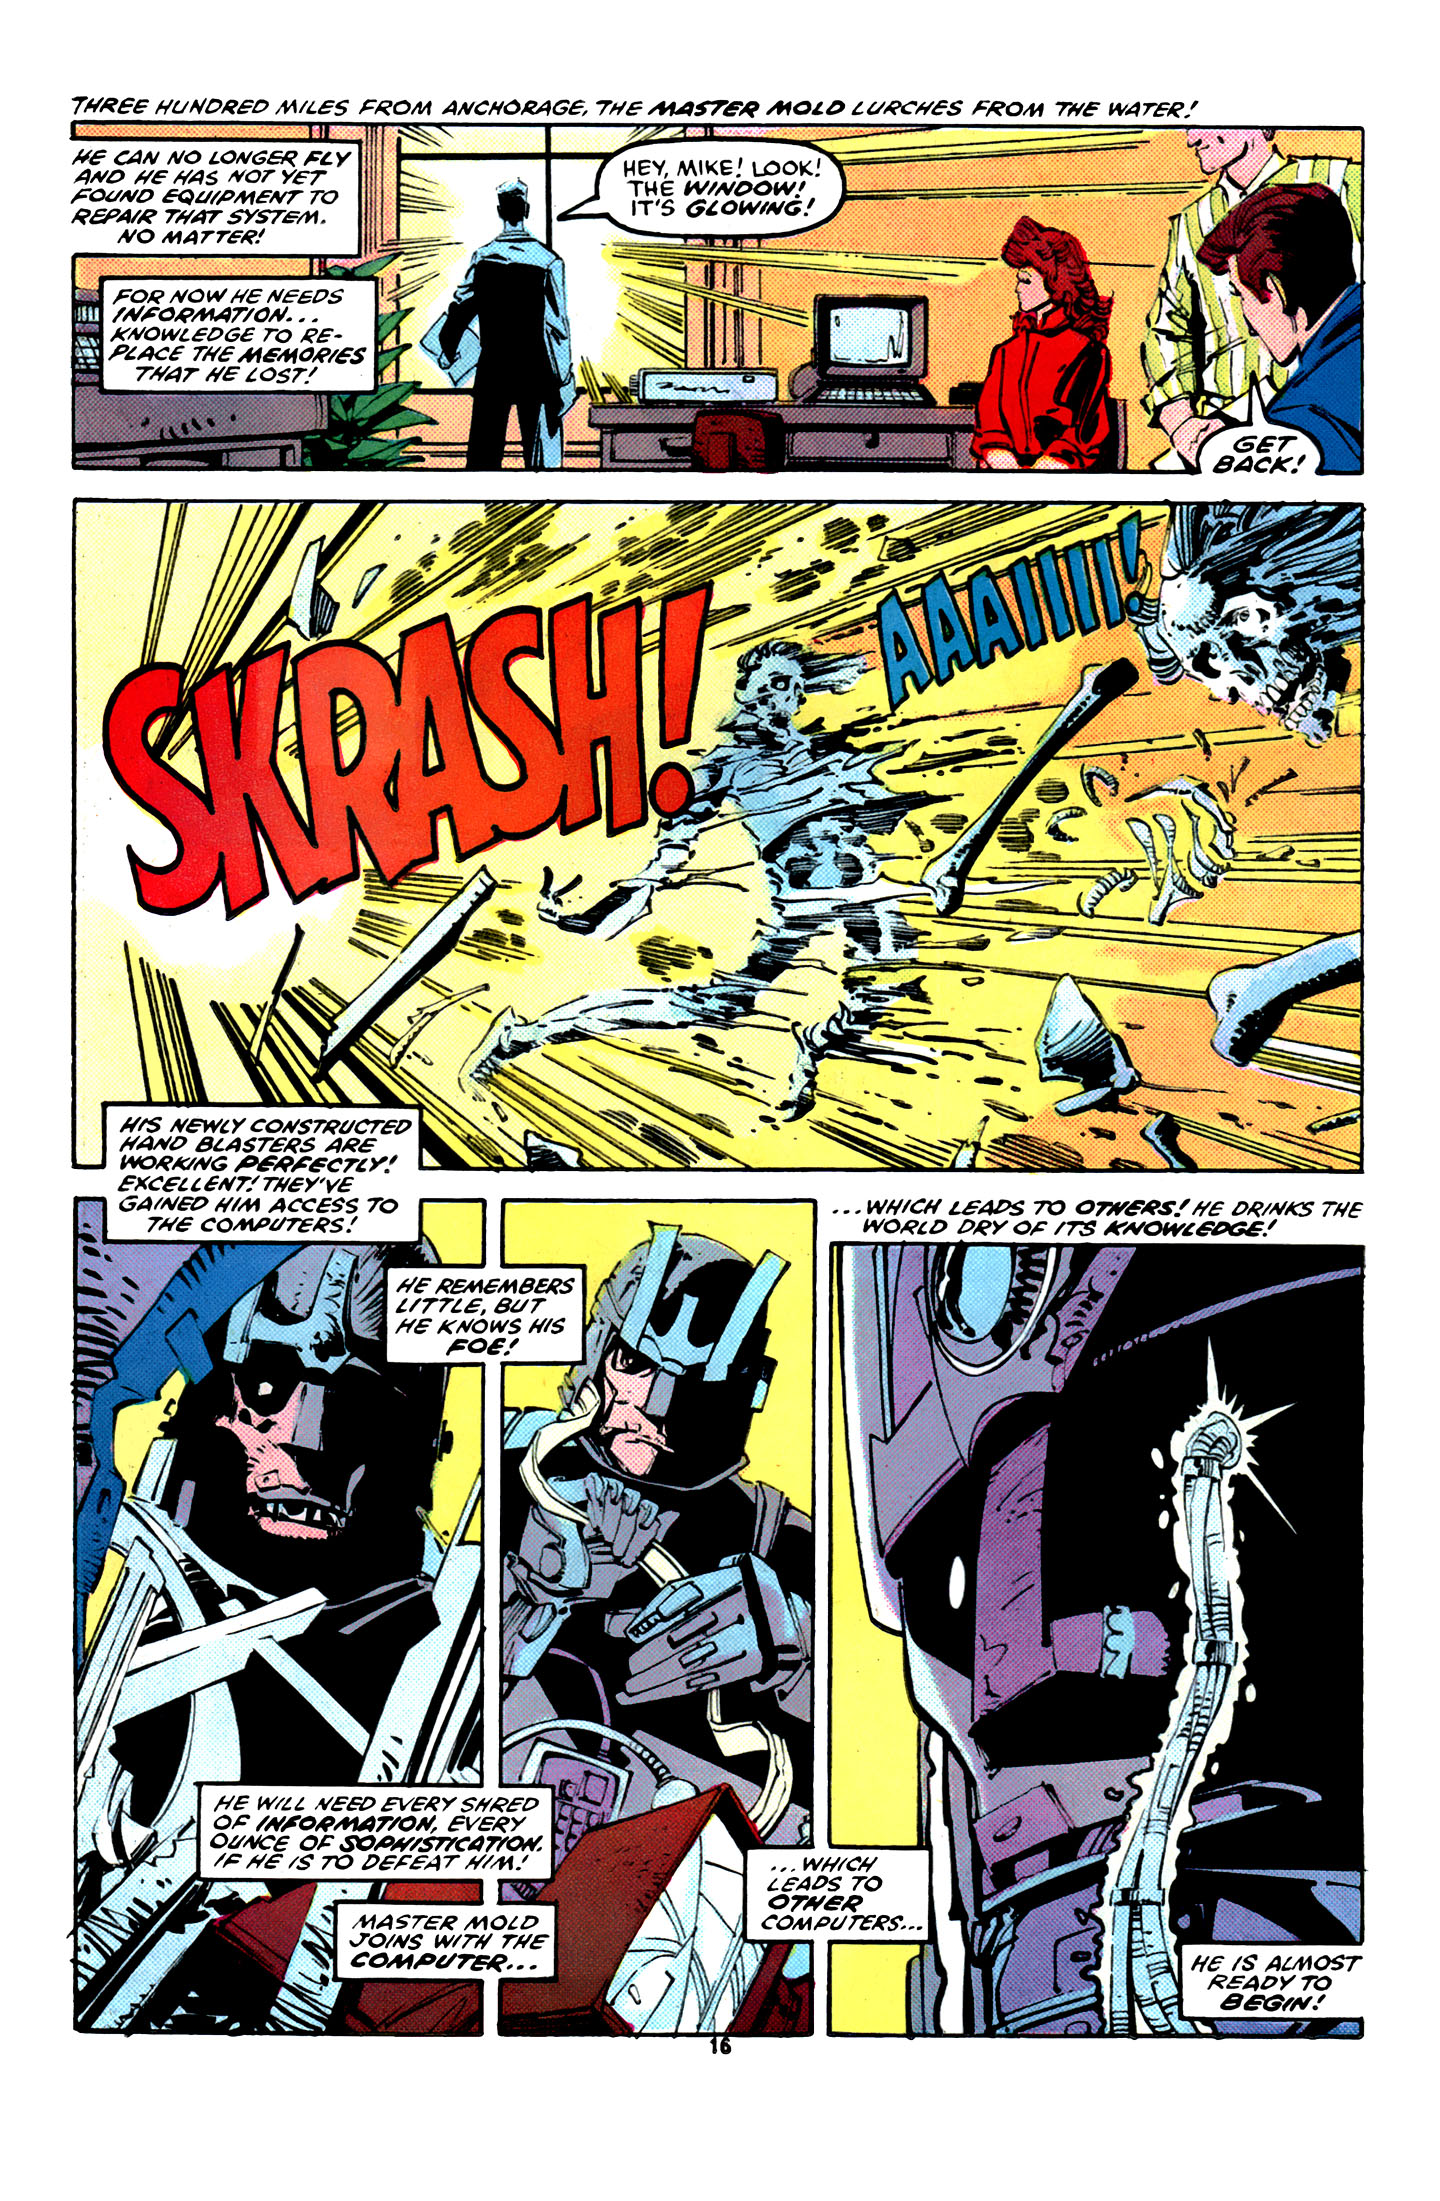 X-Factor (1986) 13 Page 16